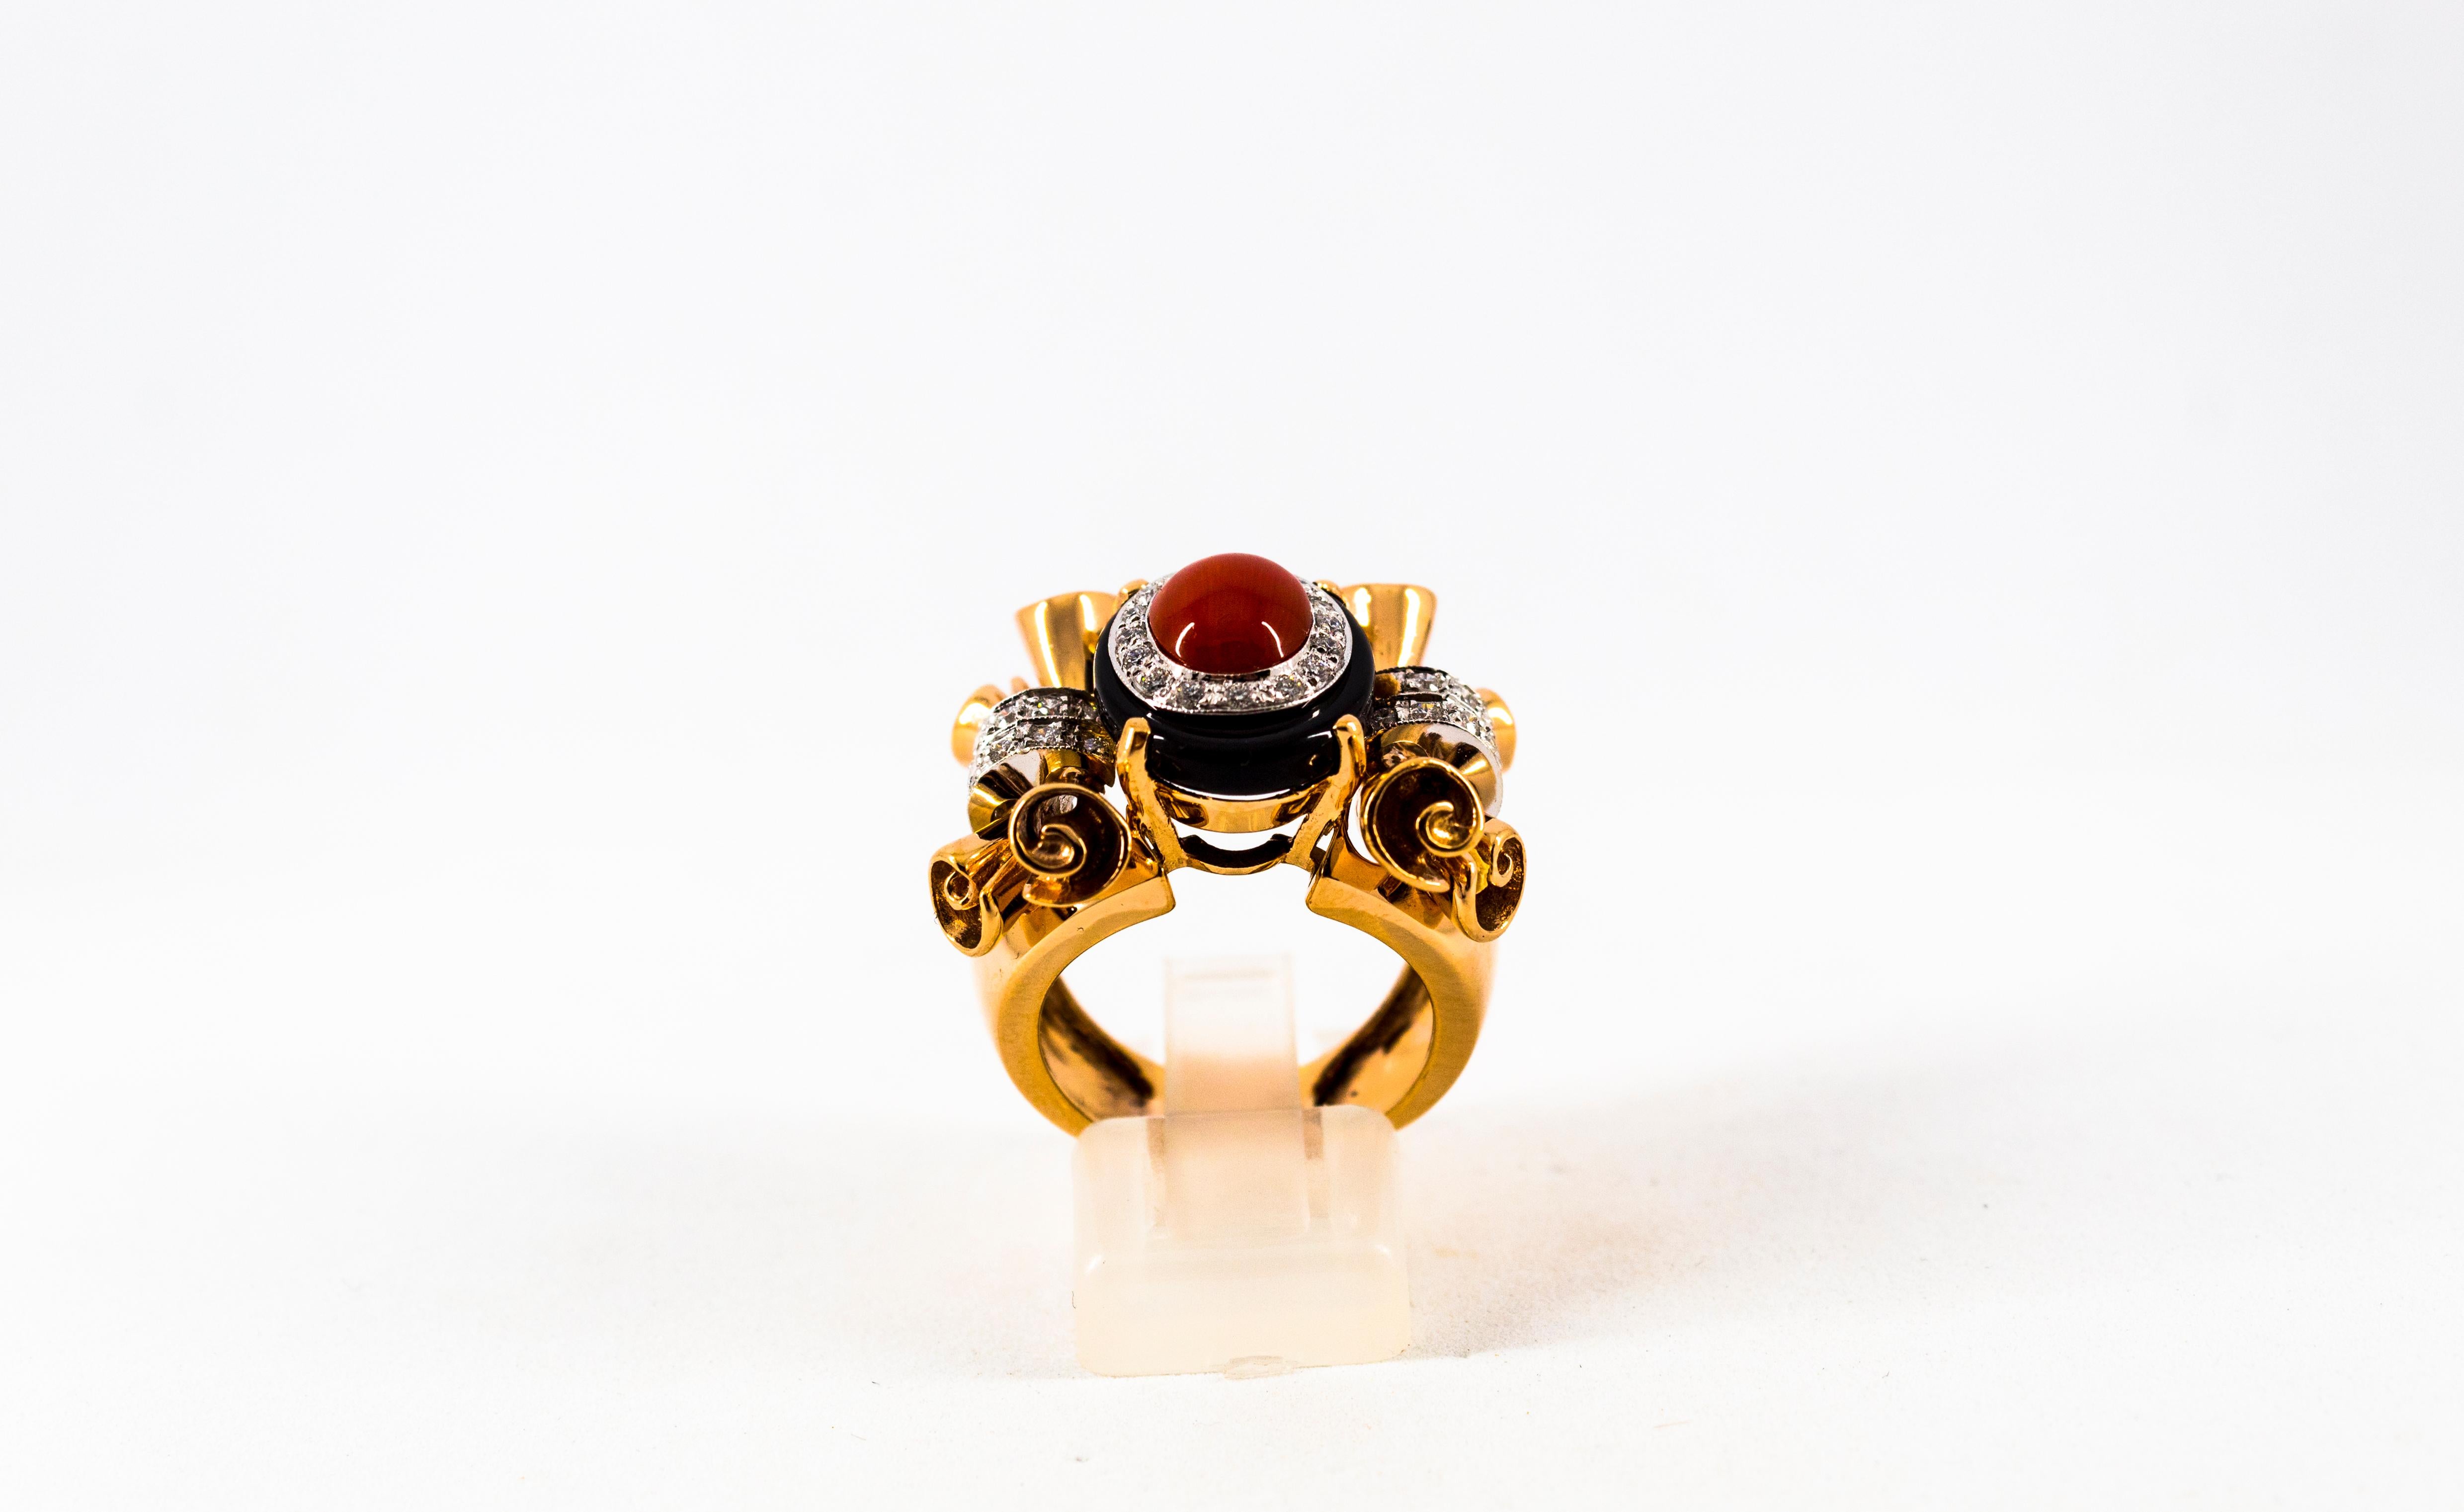 This Ring is made of 14K Yellow Gold.
This Ring has 0.47 Carats of White Diamonds.
This Ring has Red Mediterranean (Sardinia, Italy) Coral.
This Ring has also Onyx.
Size ITA: 14 USA: 6 3/4
This Ring is available also with a central Turquoise.
We're